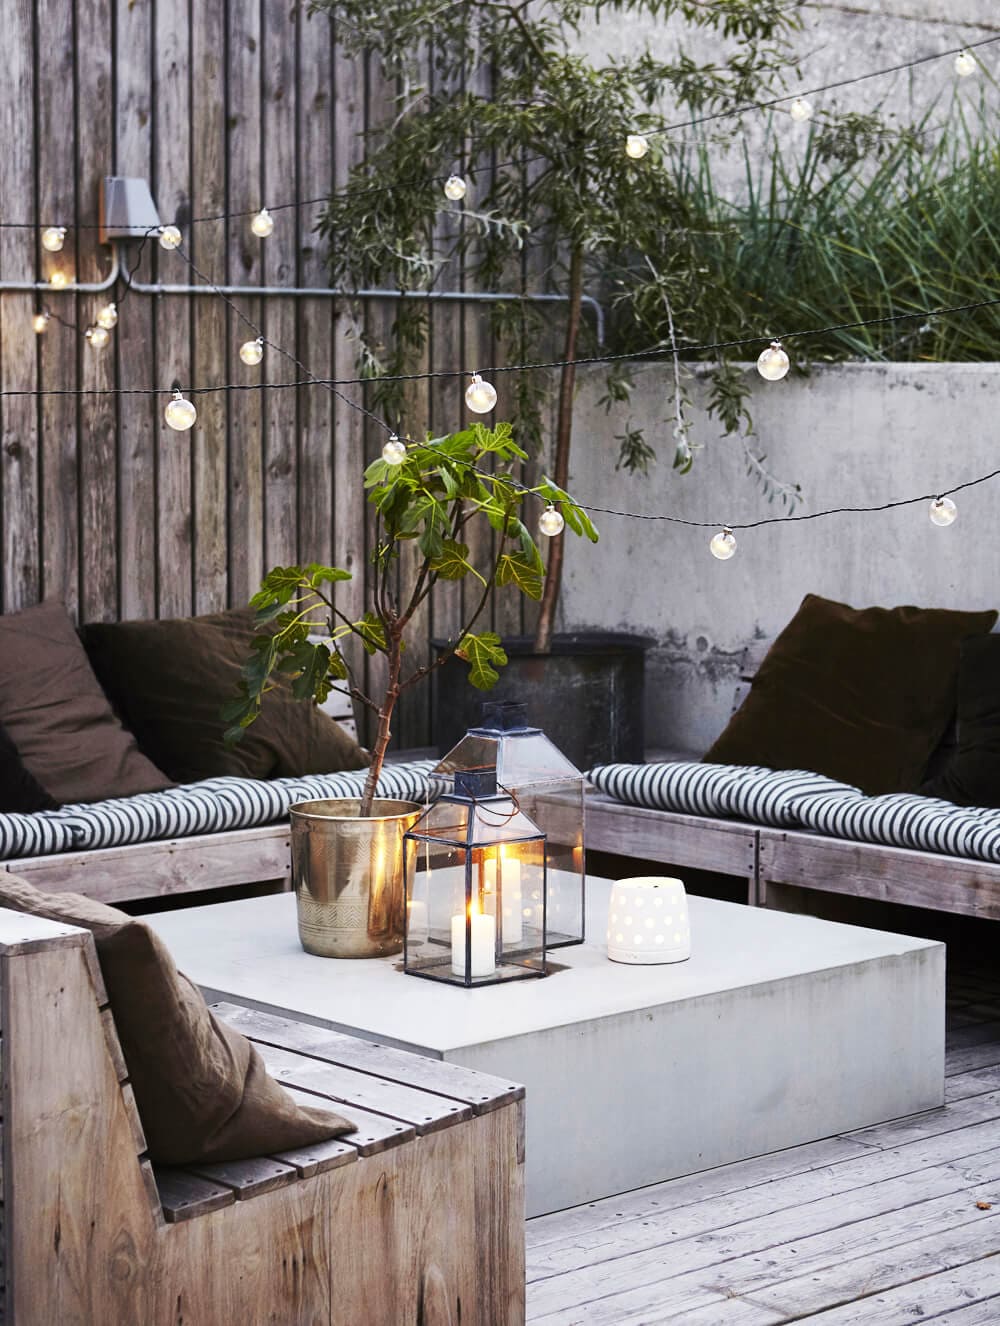 23 fabulous lighting ideas to liven up your outdoor living space - 83